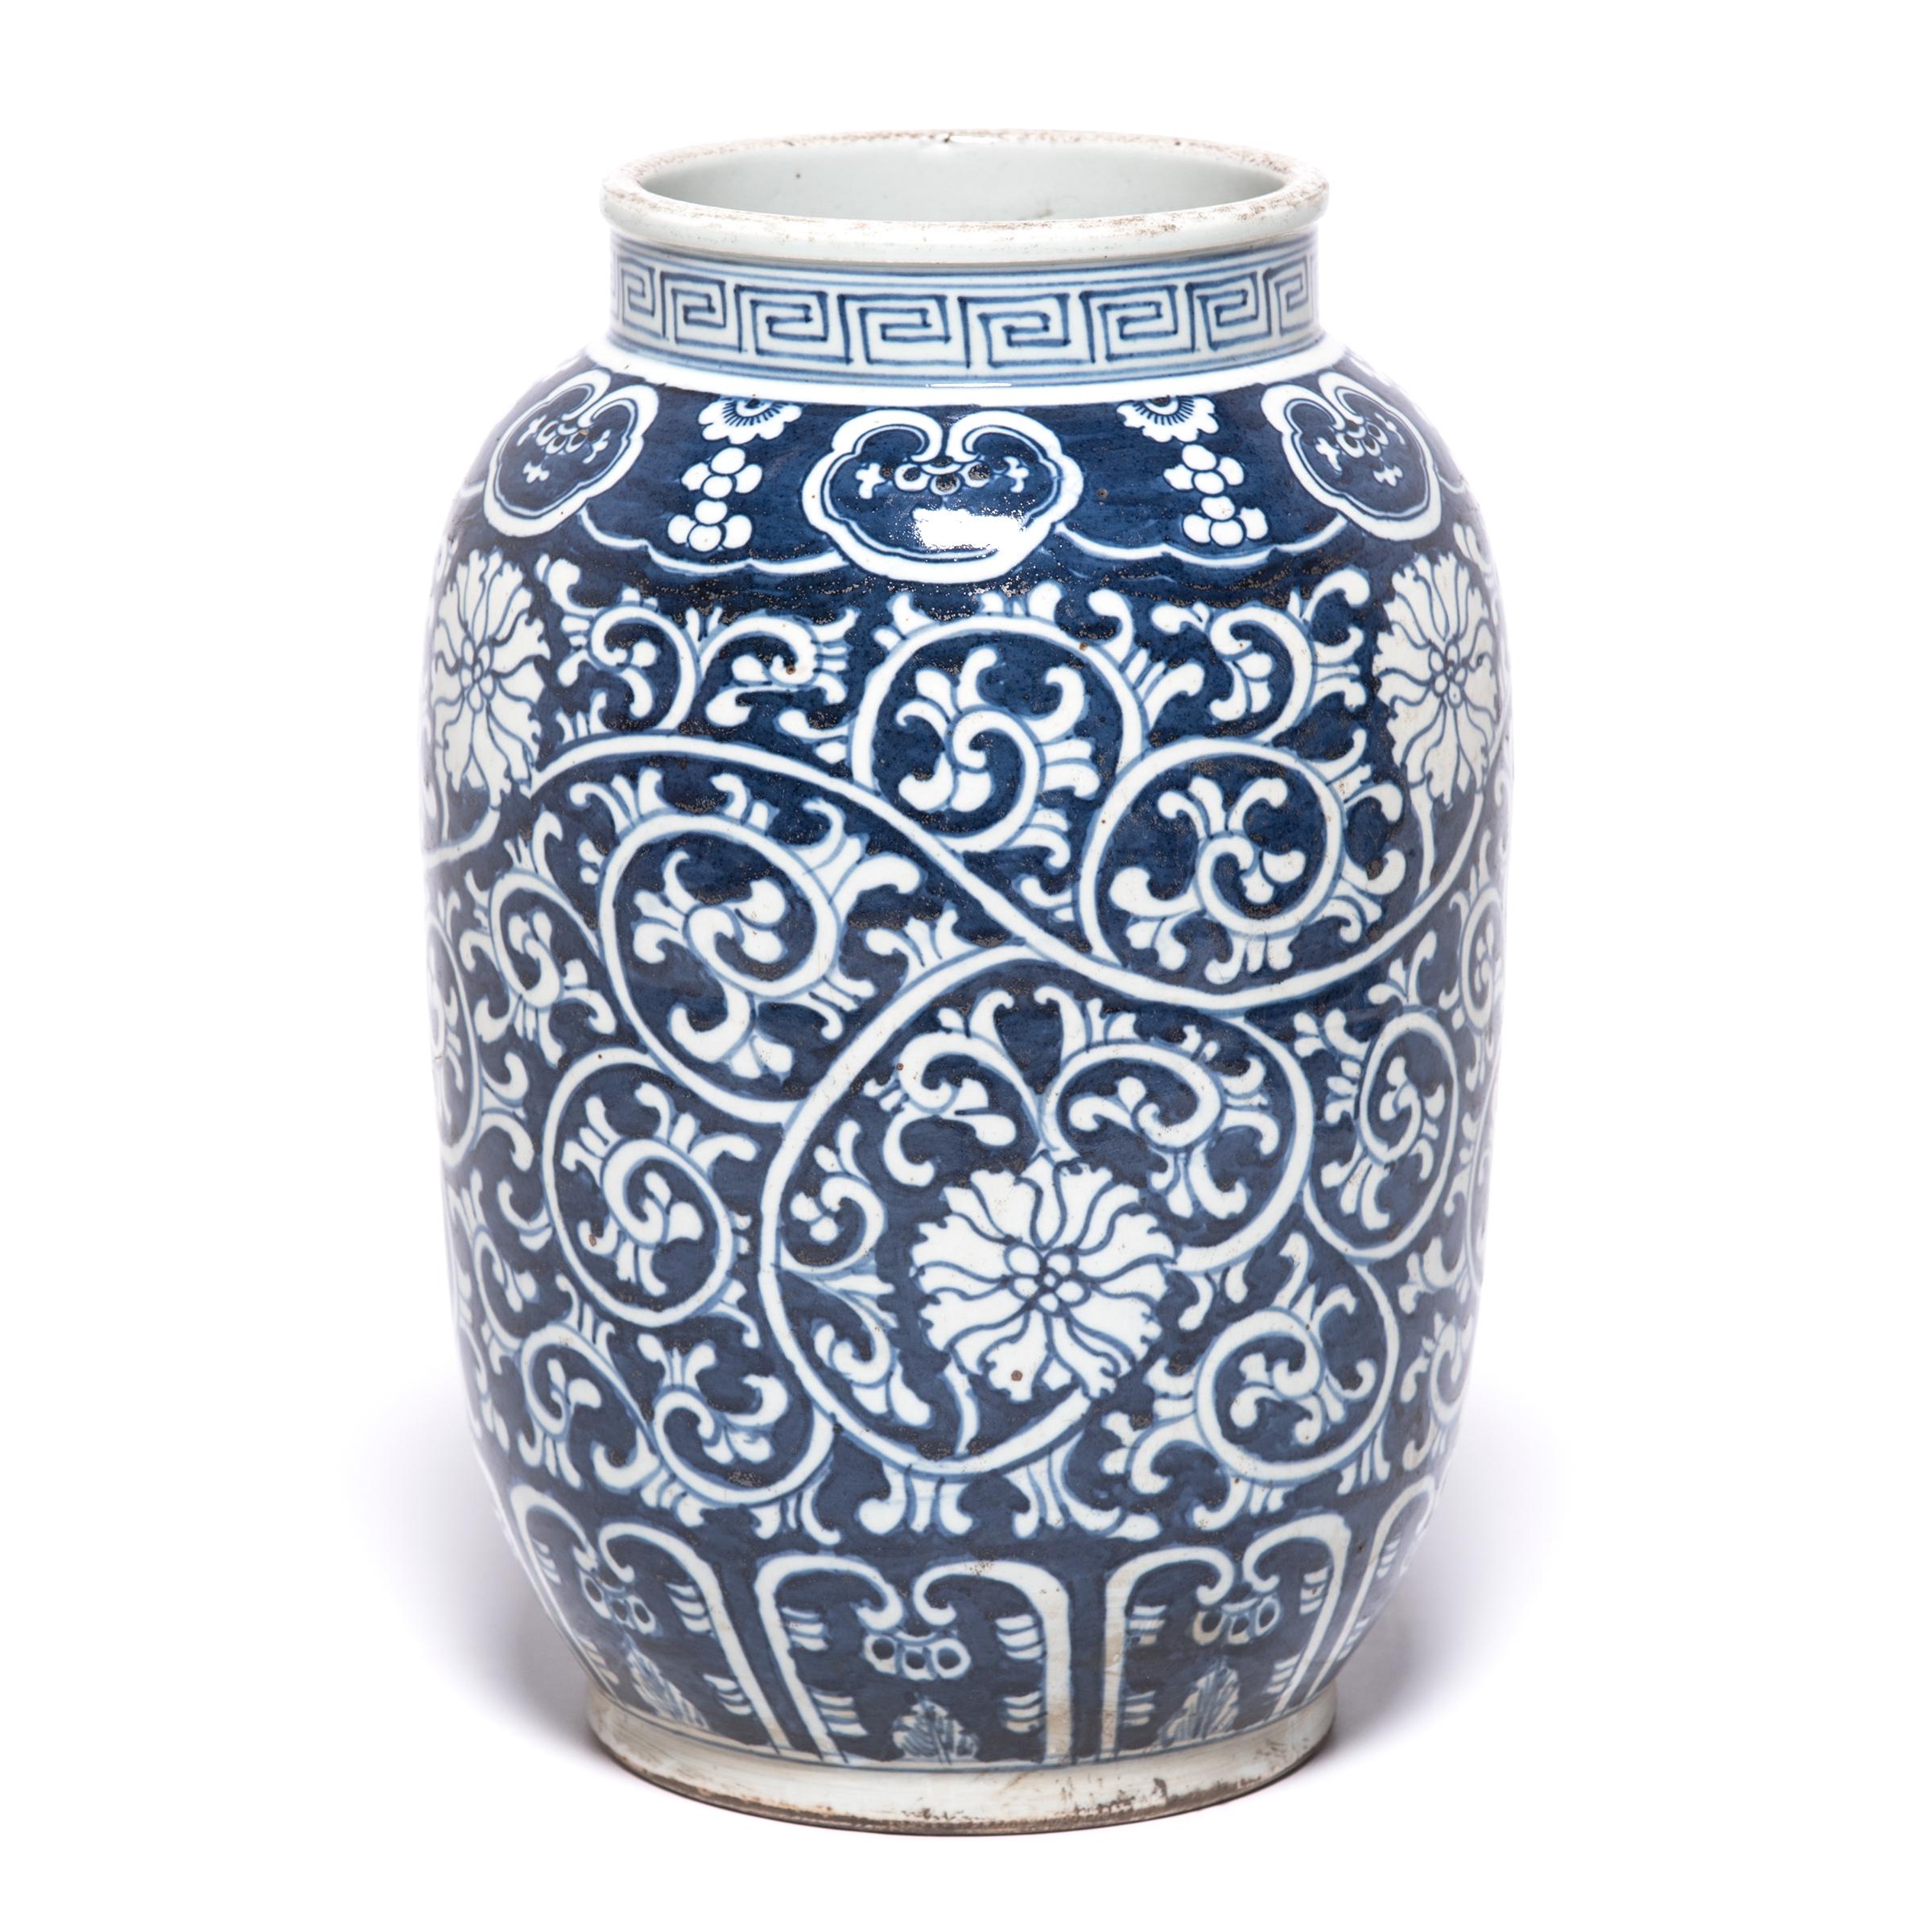 Drawing on China’s long-standing blue and white porcelain tradition, contemporary artisans in Beijing replicate the celebrated technique in this handsome jar. Using the jar’s simple shape as a blank canvas, the ceramicists contrast the crisp white